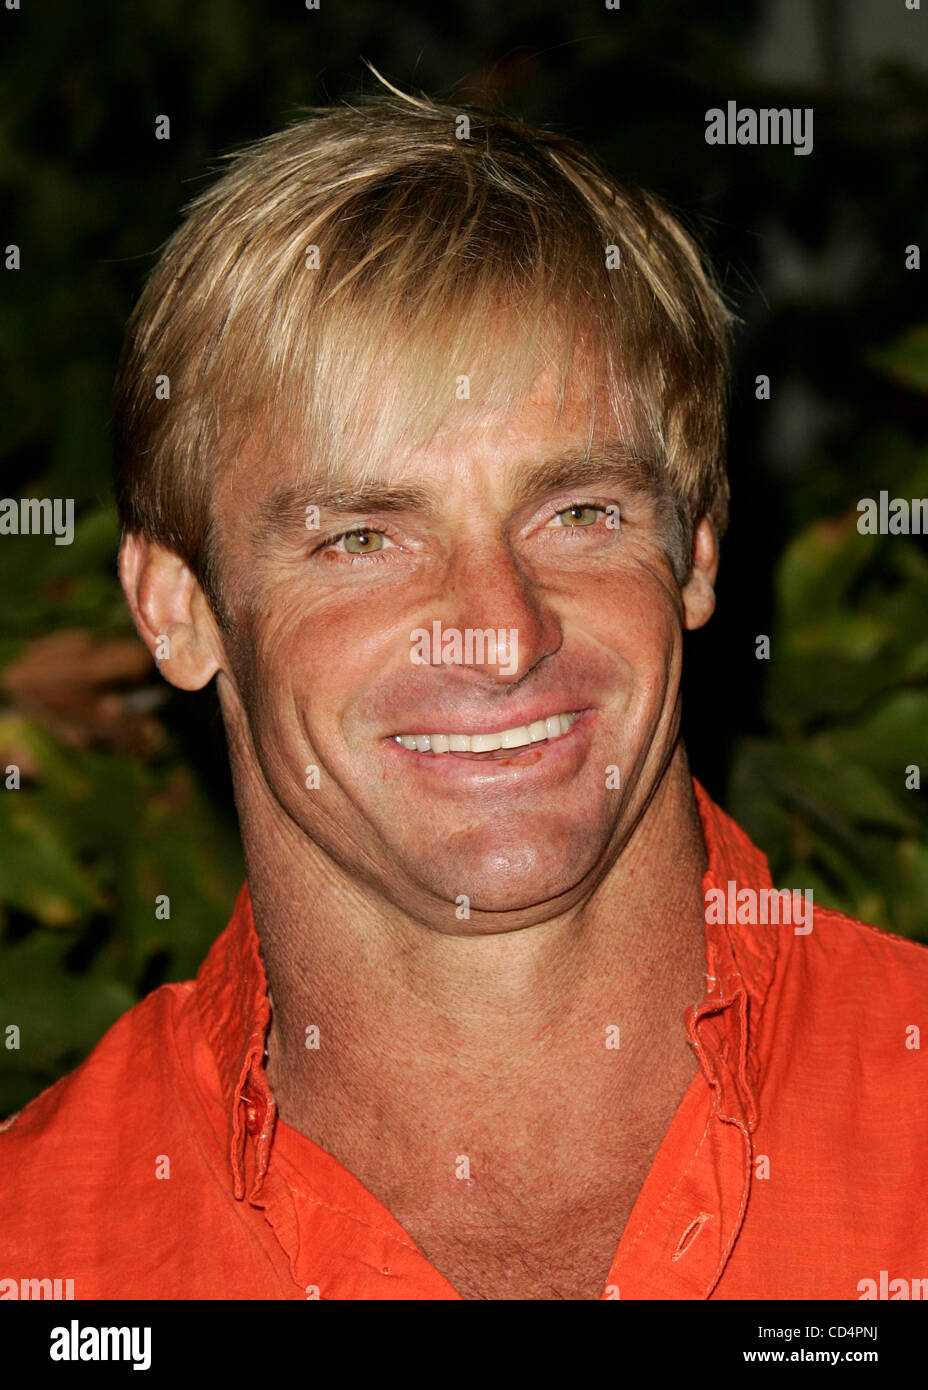 Oct 18, 2008 - Pacific Palisades, California, USA - Surfer LAIRD HAMILTON arriving to the Oceana's Annual Partners Award Gala held at a private home. (Credit Image: © Lisa O'Connor/ZUMA Press) Stock Photo